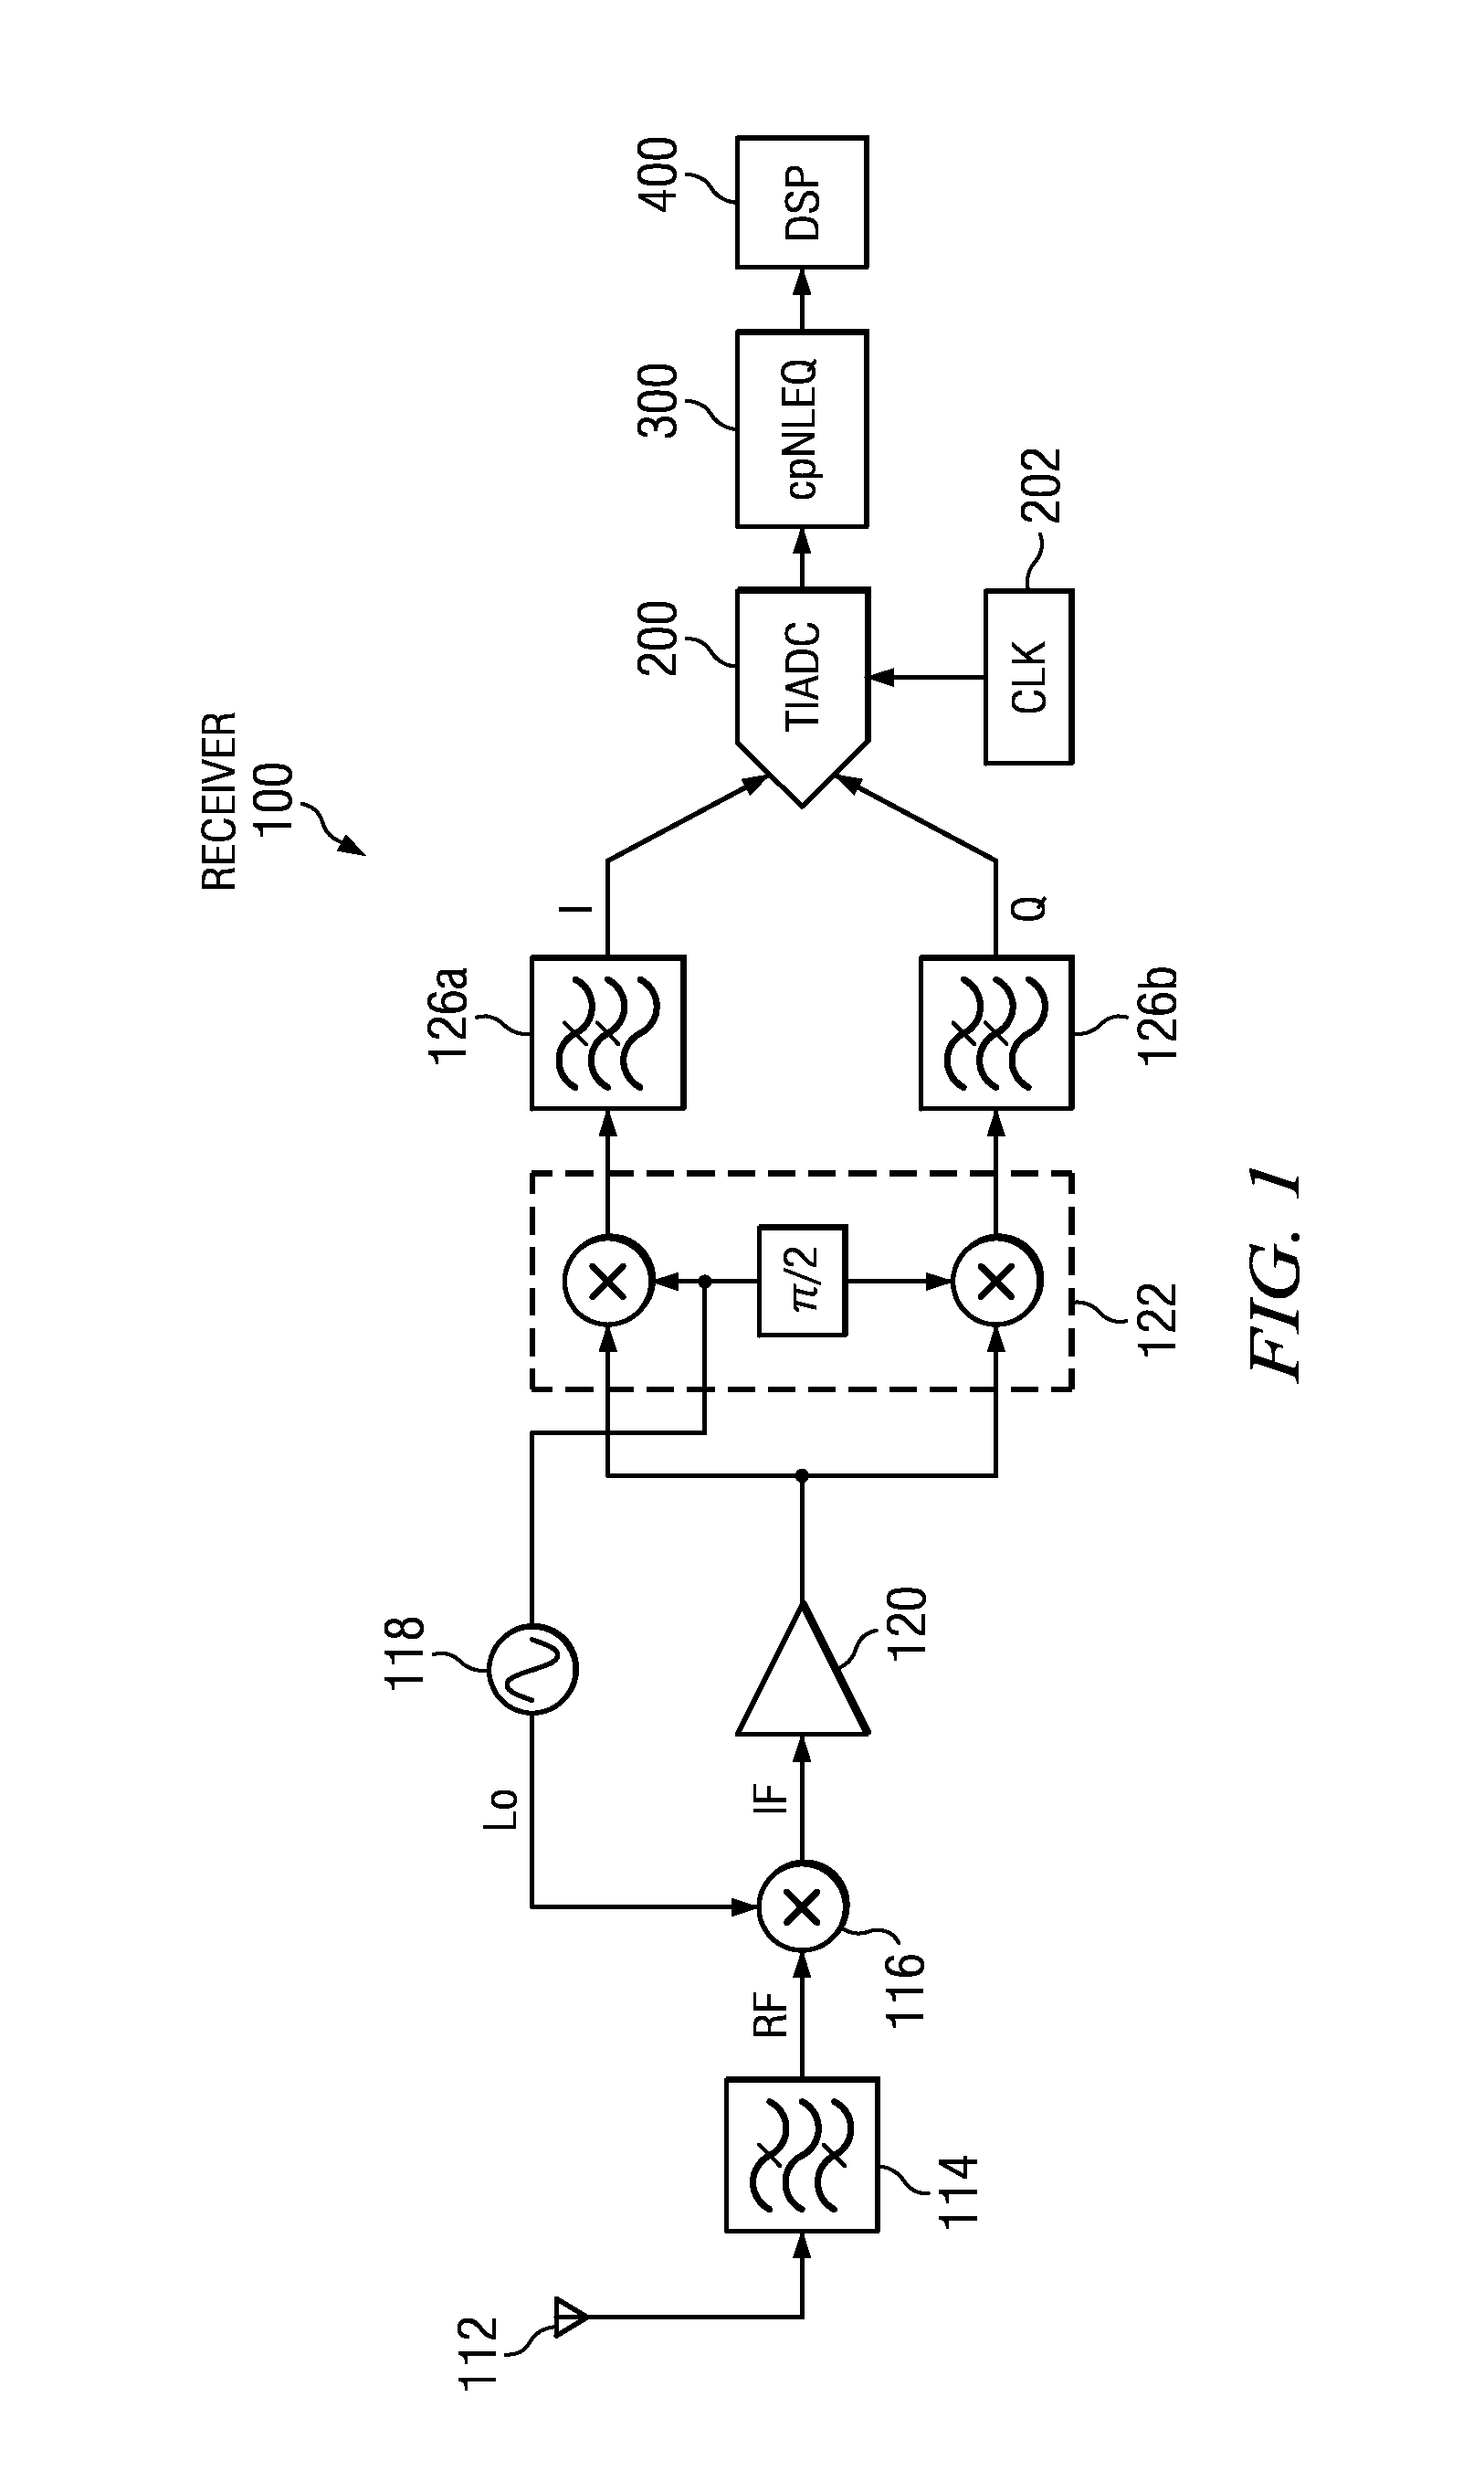 Method and apparatus for complex in-phase/quadrature polyphase nonlinear equalization